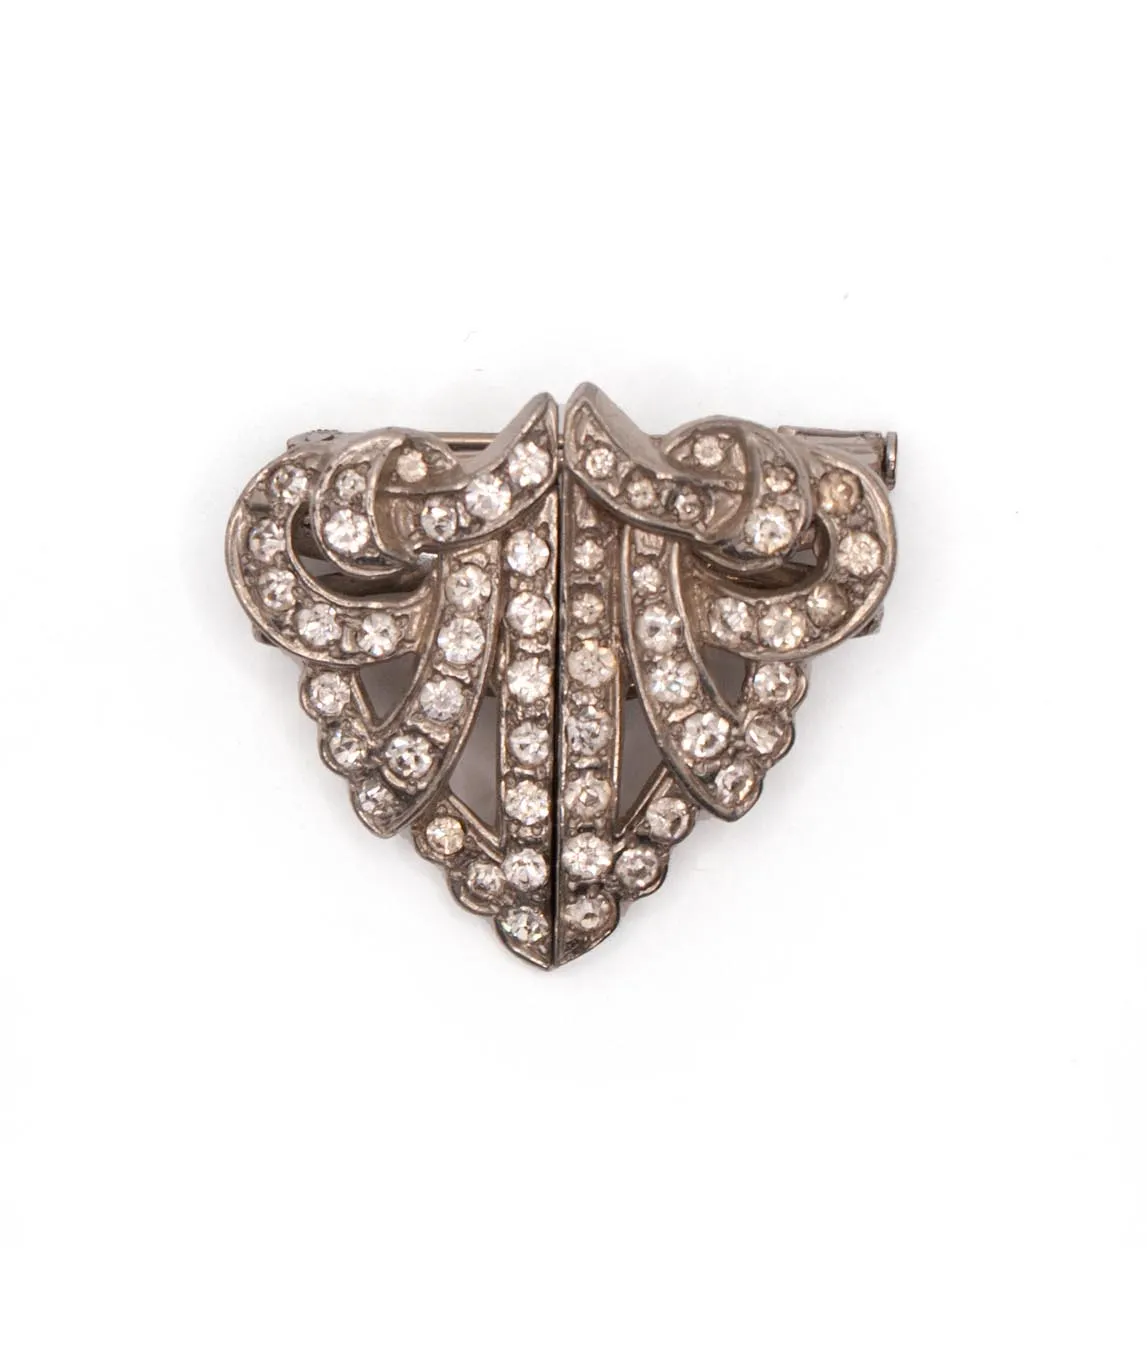 Art Deco era French double dress clip in a shield shape silver alloy with clear crystals